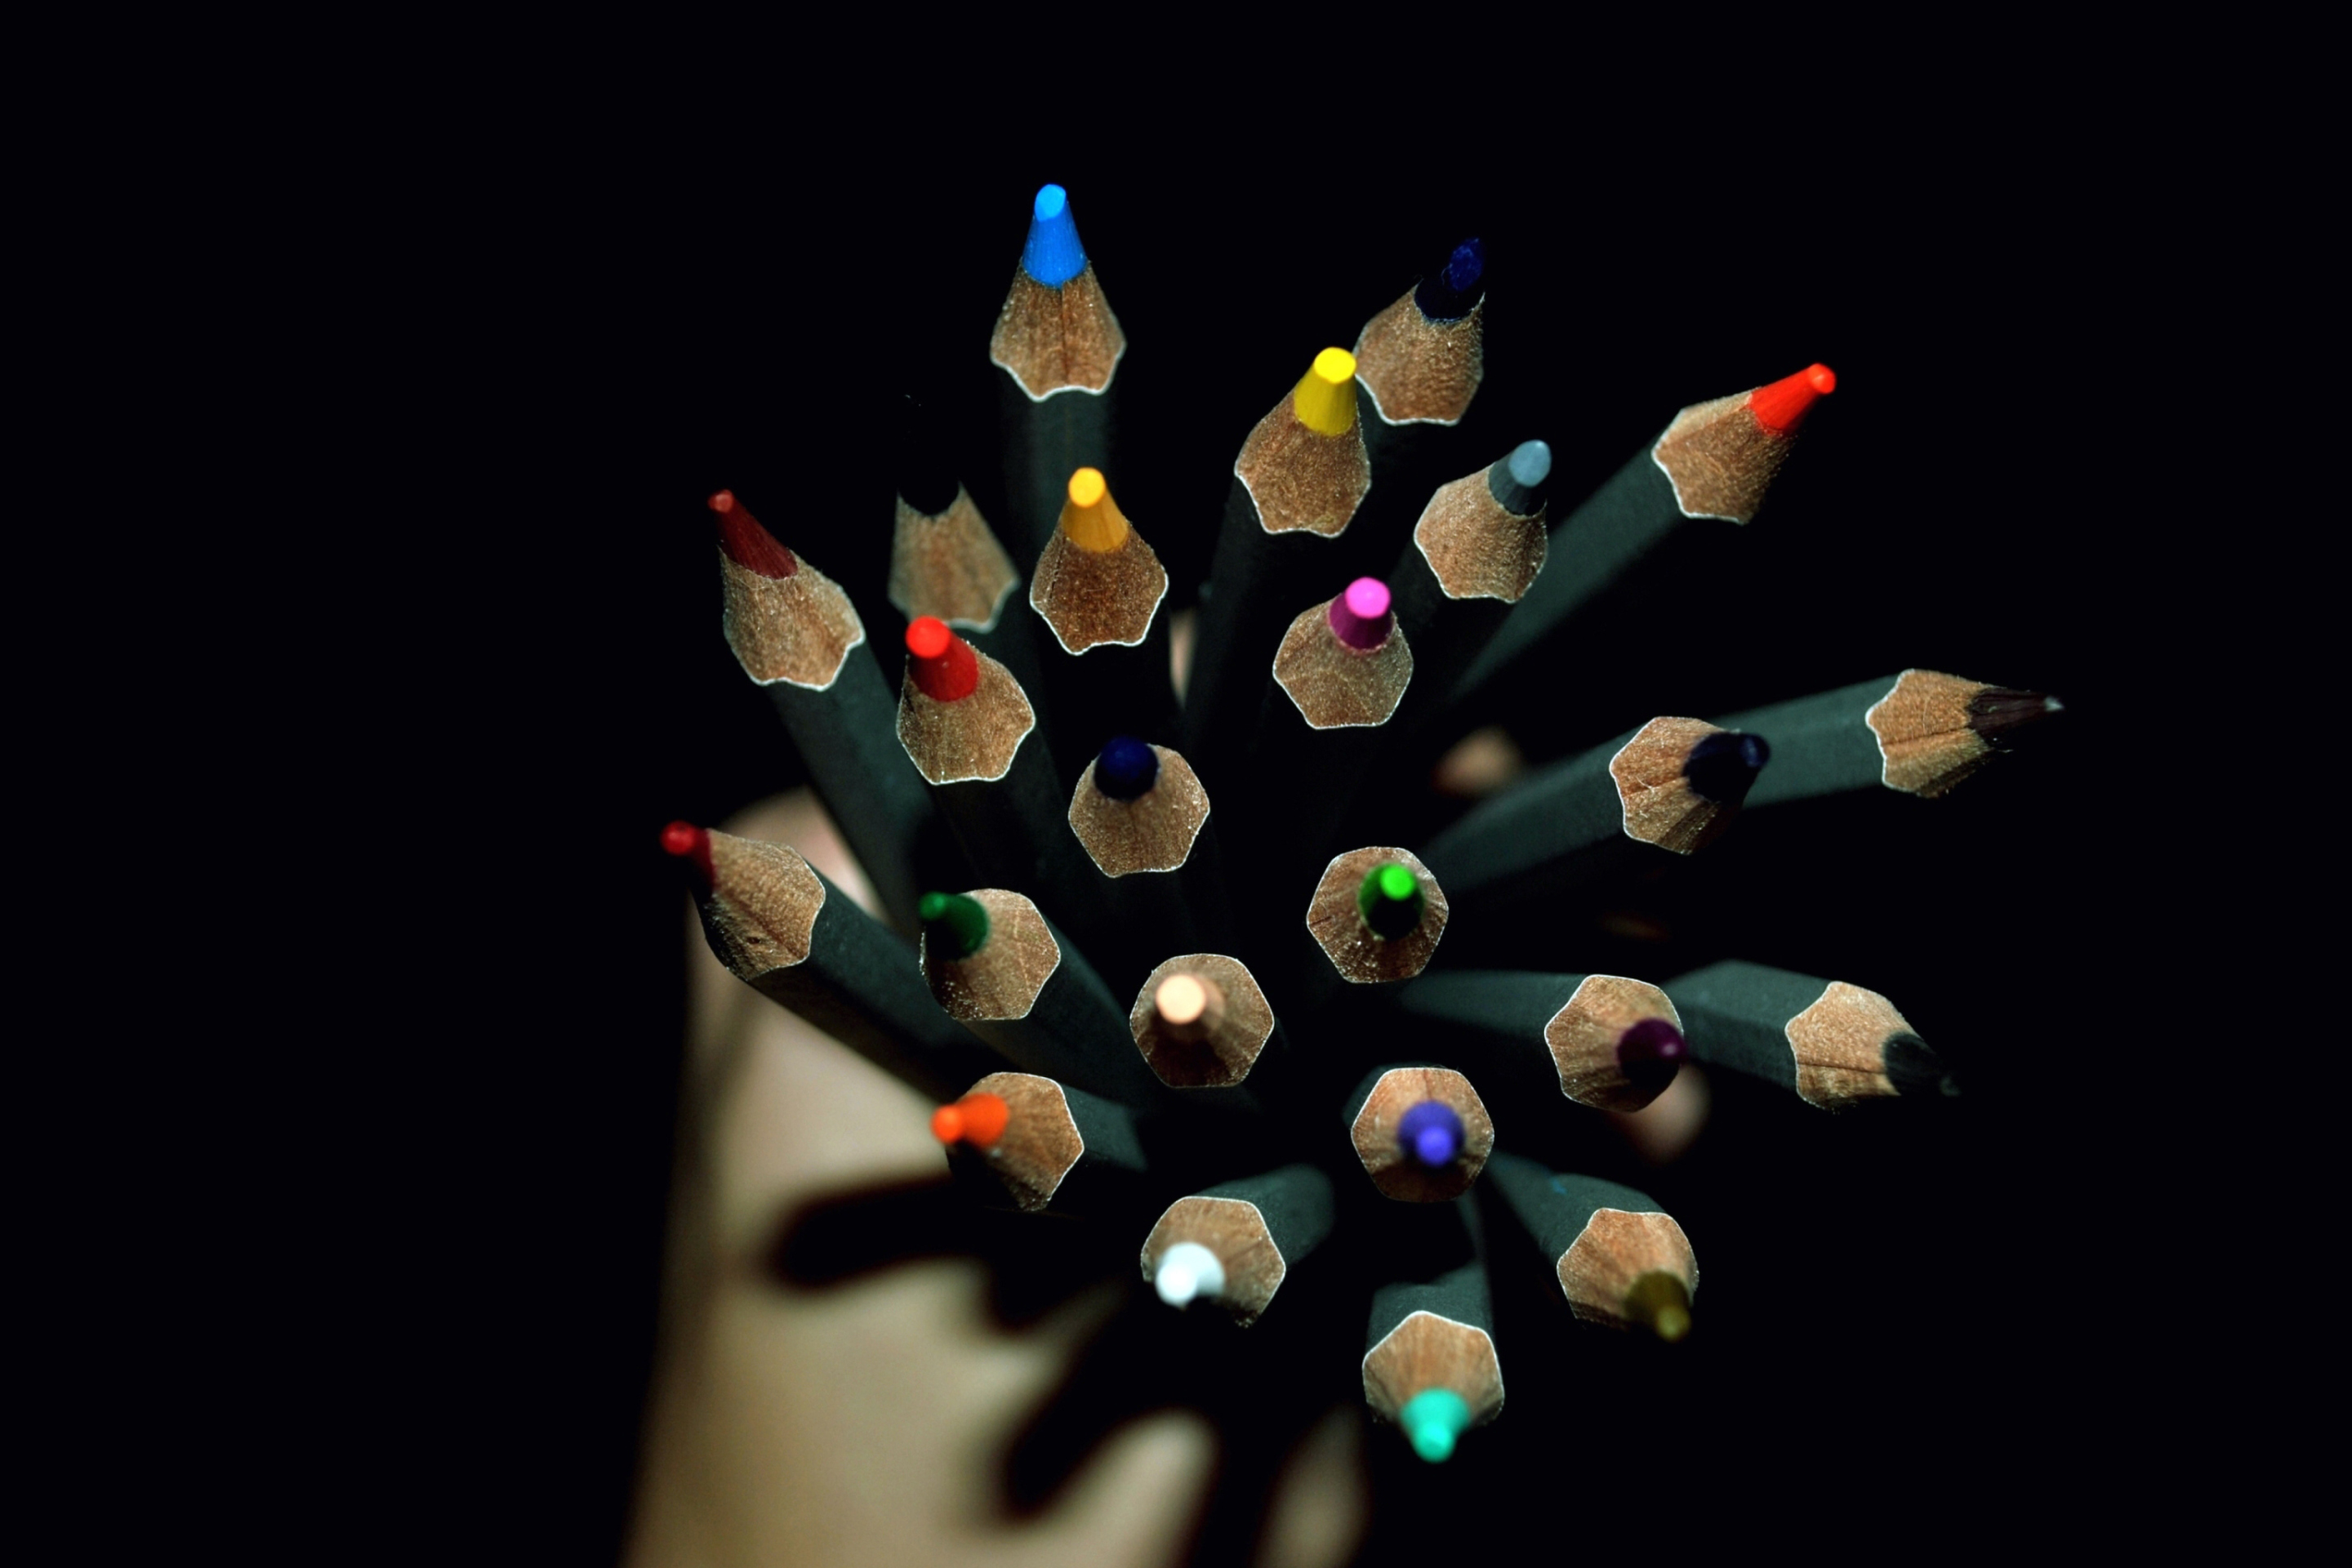 Colorful Pencils In Hand wallpaper 2880x1920